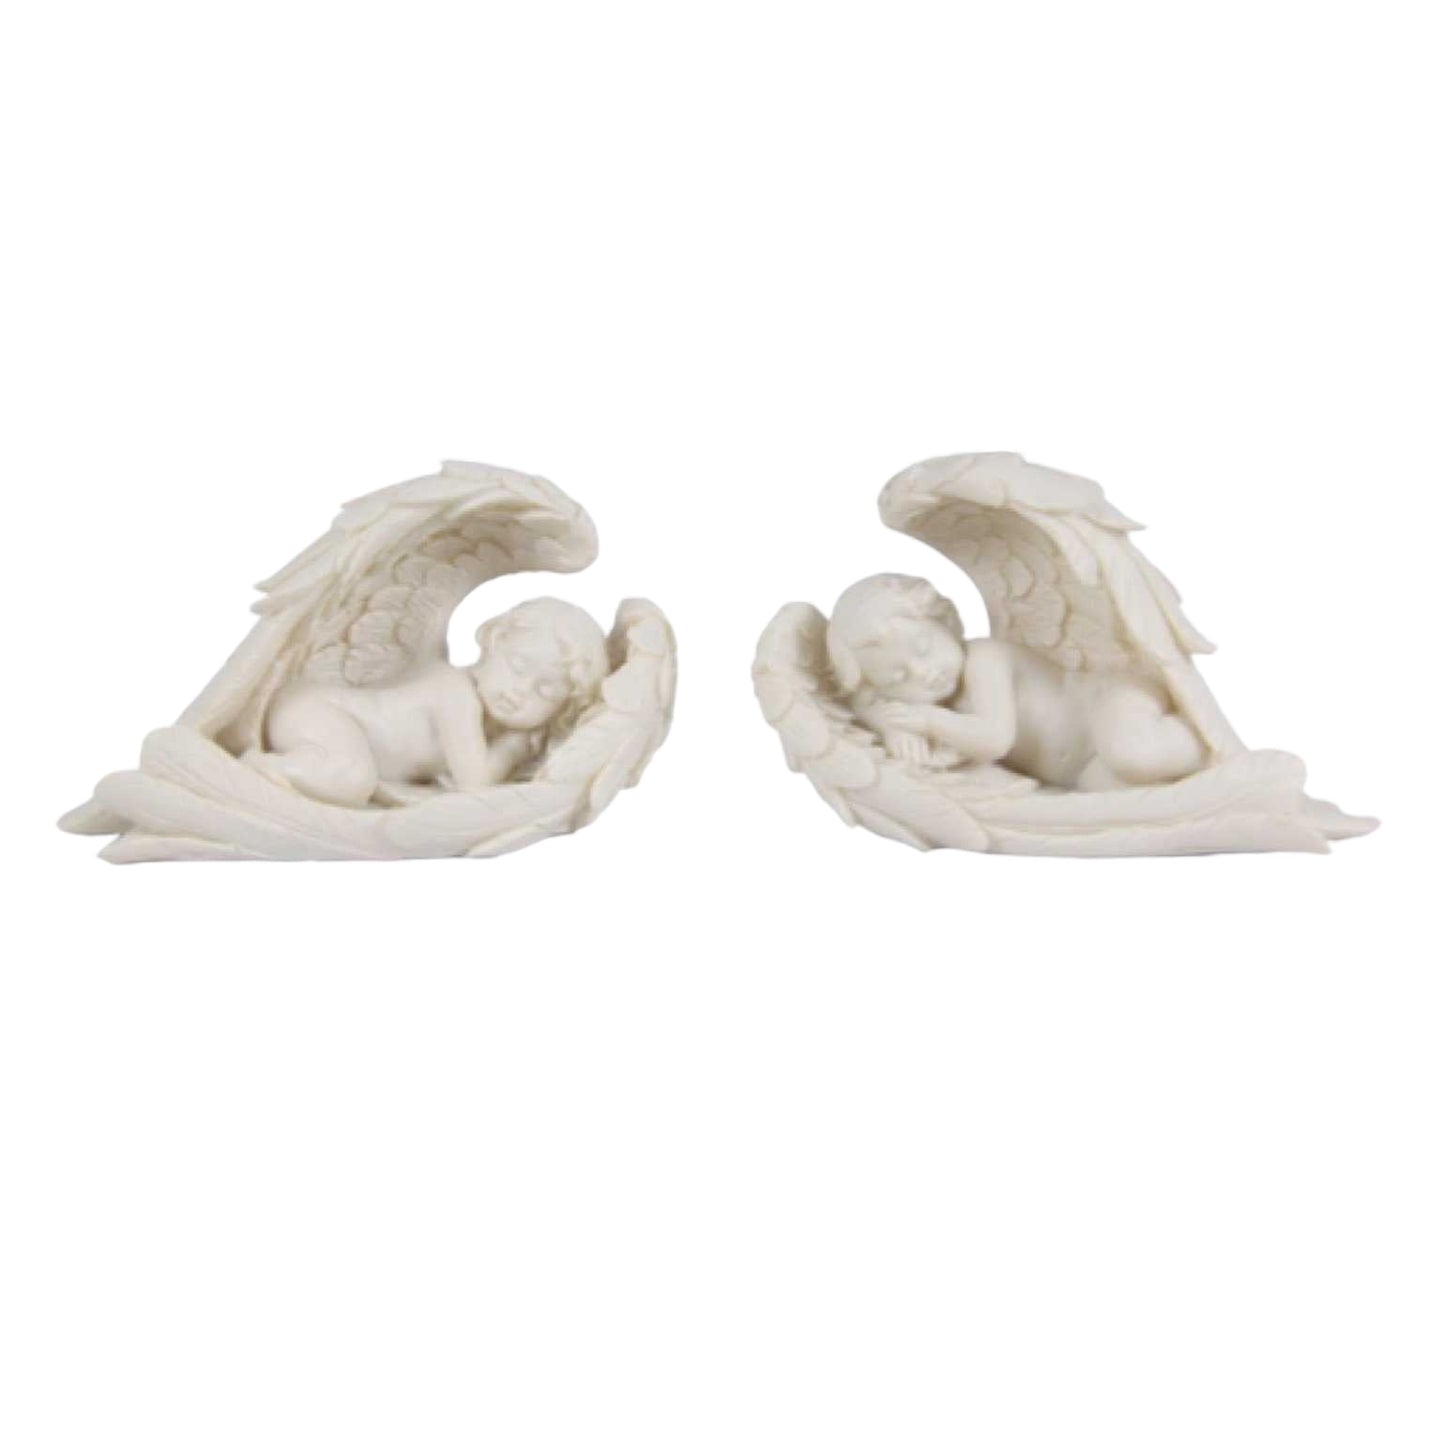 Cherub Angel with Wings Set of 2 - The Renmy Store Homewares & Gifts 